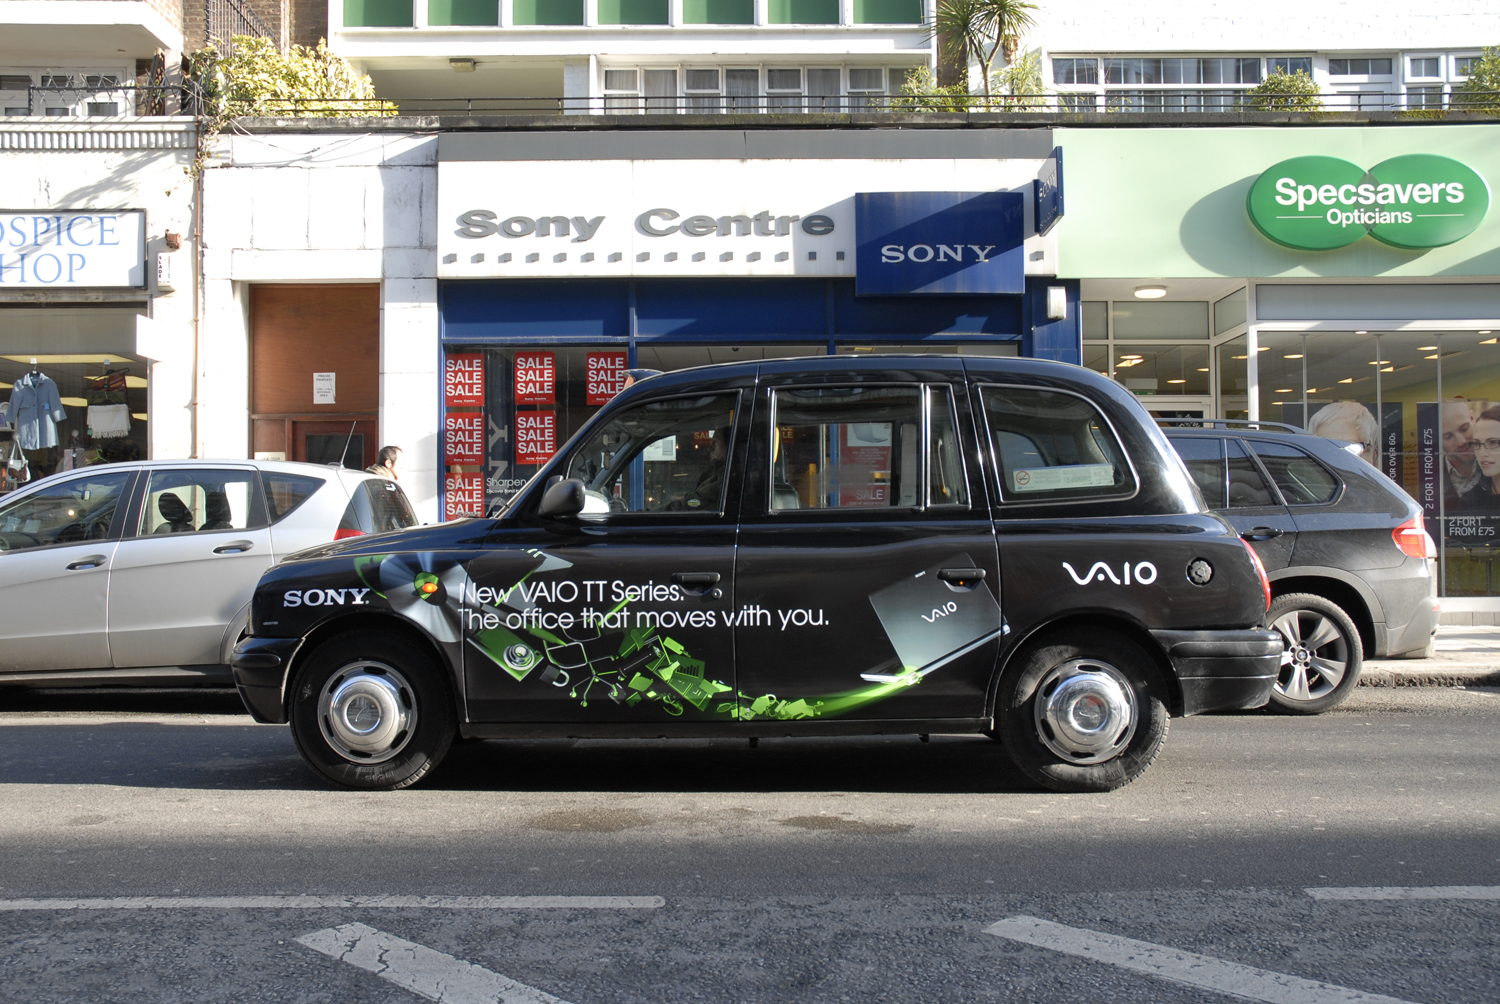 2009 Ubiquitous taxi advertising campaign for Sony Vaio - New Sony Vaio TT. The office that moves without you.